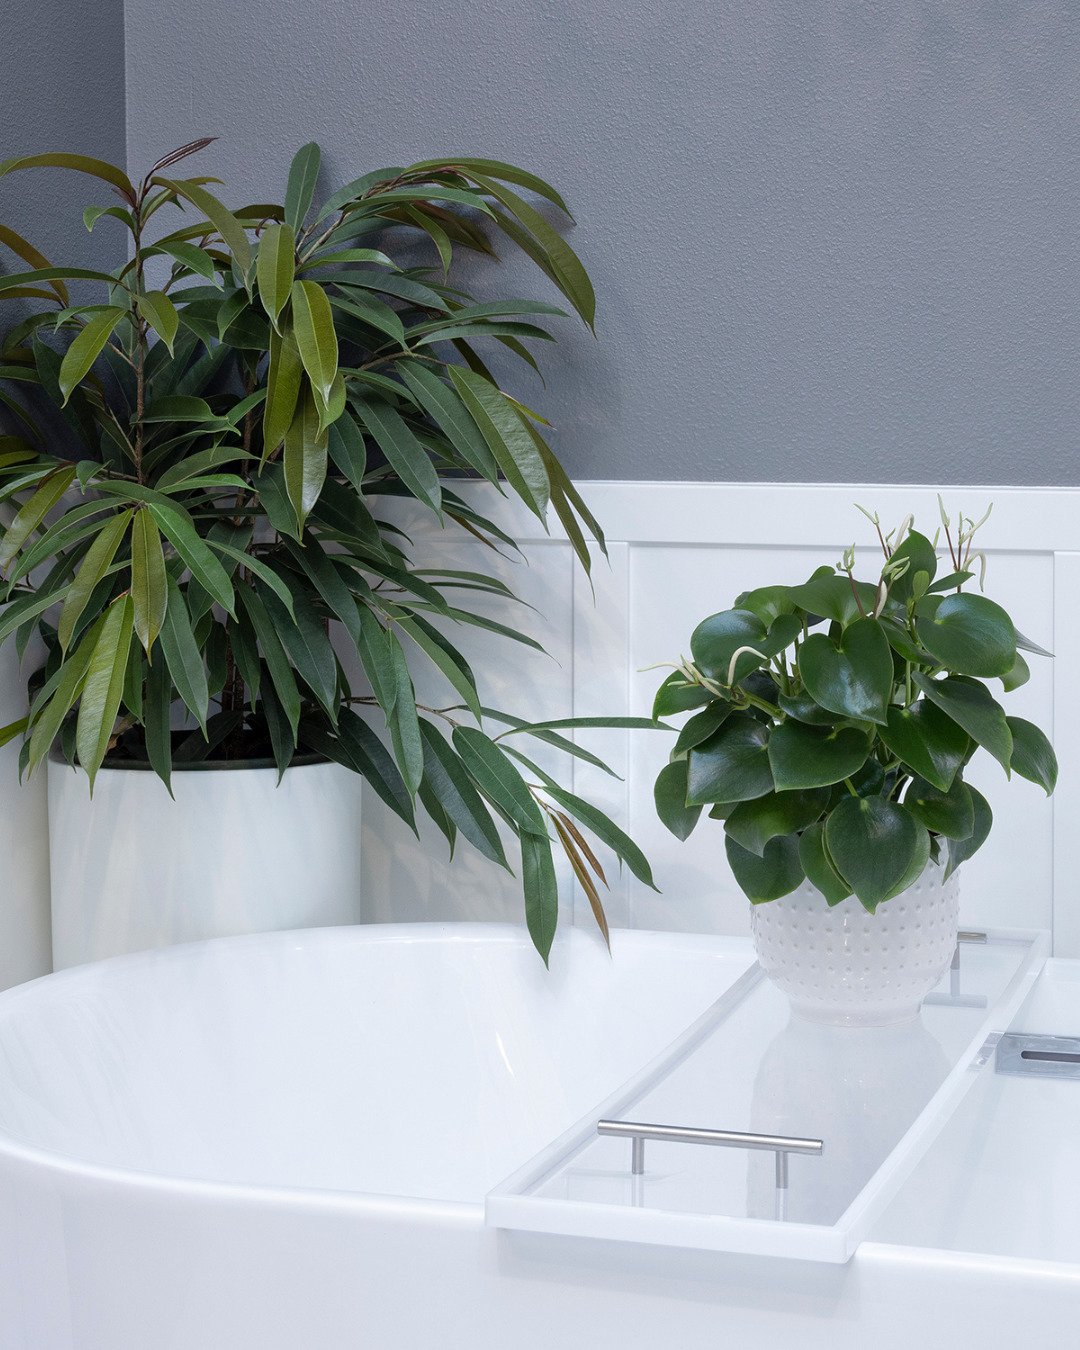 #Houseplants put the &quot;ahhhh&quot; in spa! And hint: most love the extra humidity of a bathroom. 

What's the most unusual place in your home where you have a houseplant (or two)?

#MonroviaPlants #houseplant #indoorjungle #spavibes #homespa #rel